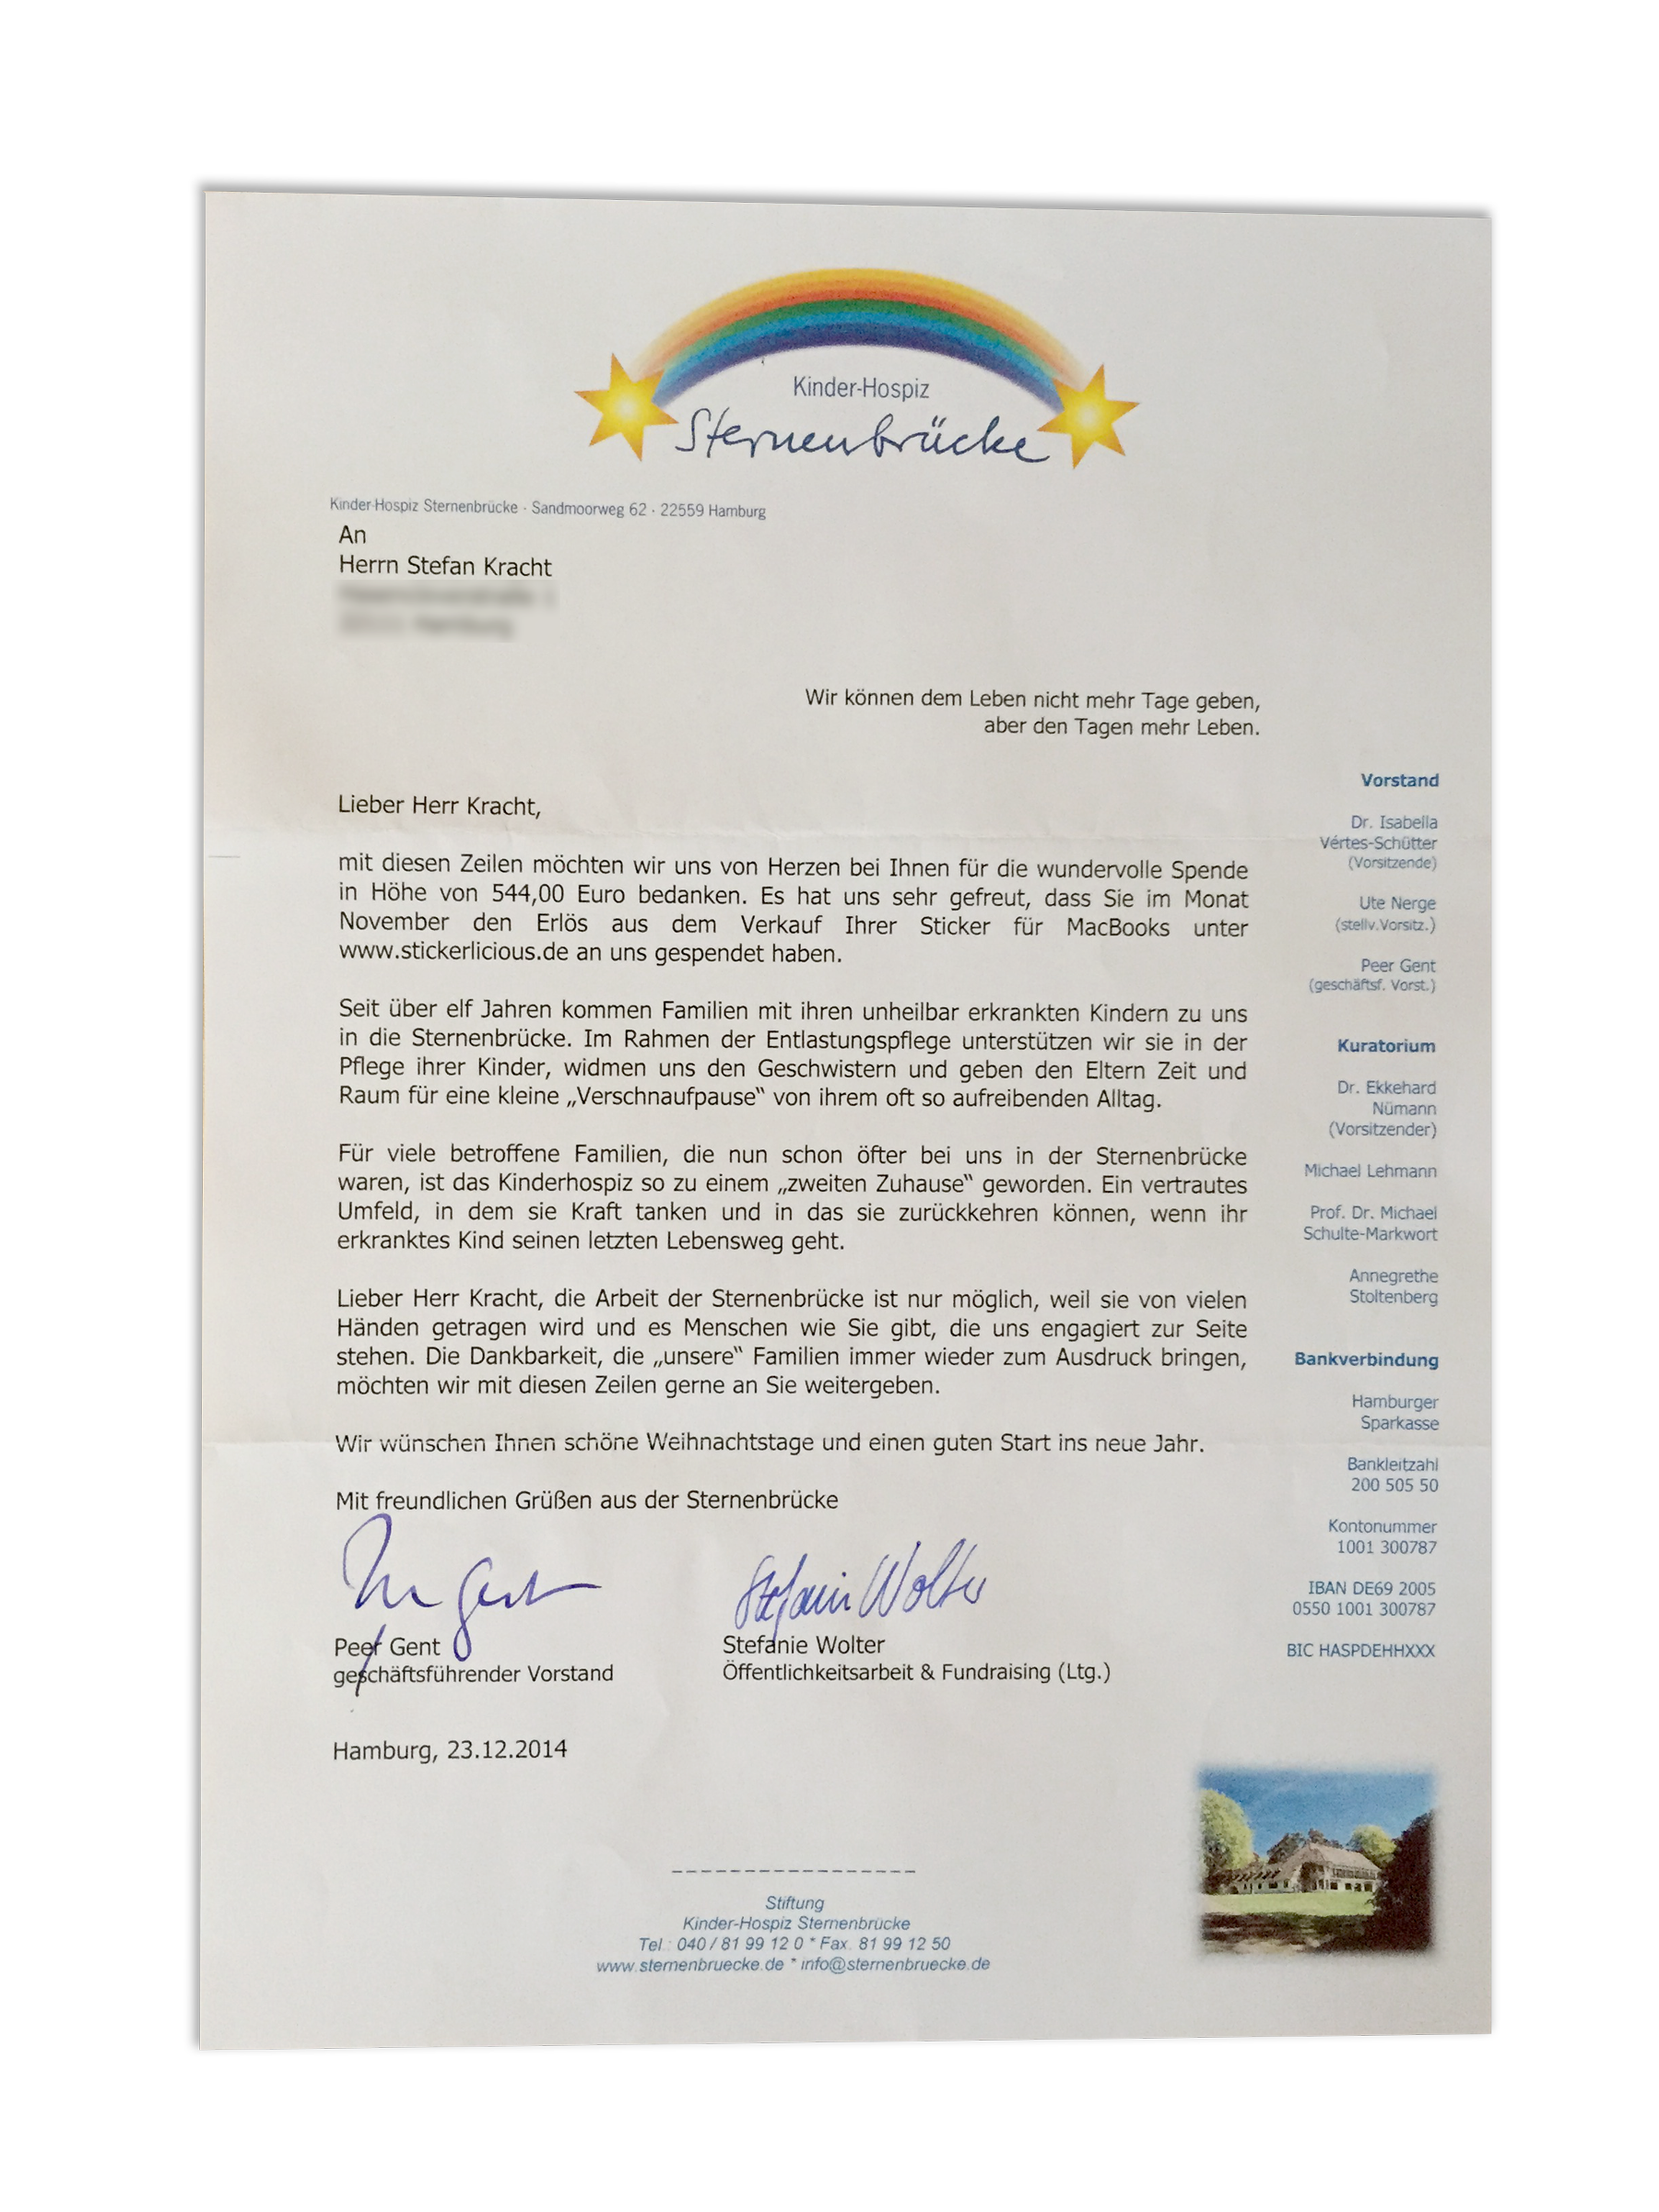 A thank you letter from the children’s hospice Sternenbrücke